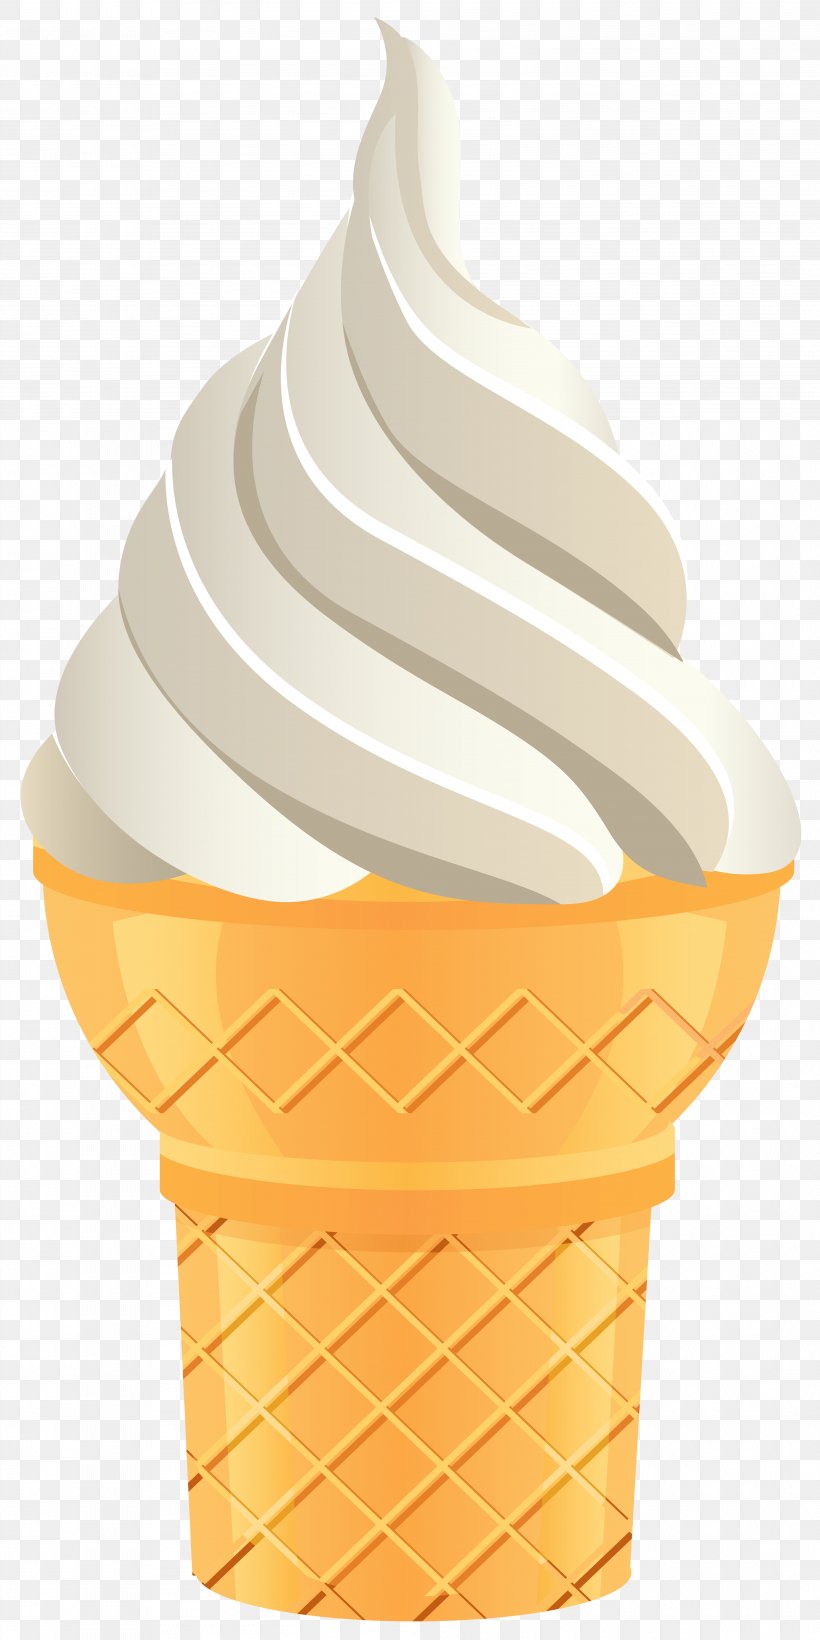 Ice Cream Cones Dairy Products Frozen Dessert, PNG, 3998x8000px, Ice Cream, Cream, Dairy, Dairy Product, Dairy Products Download Free